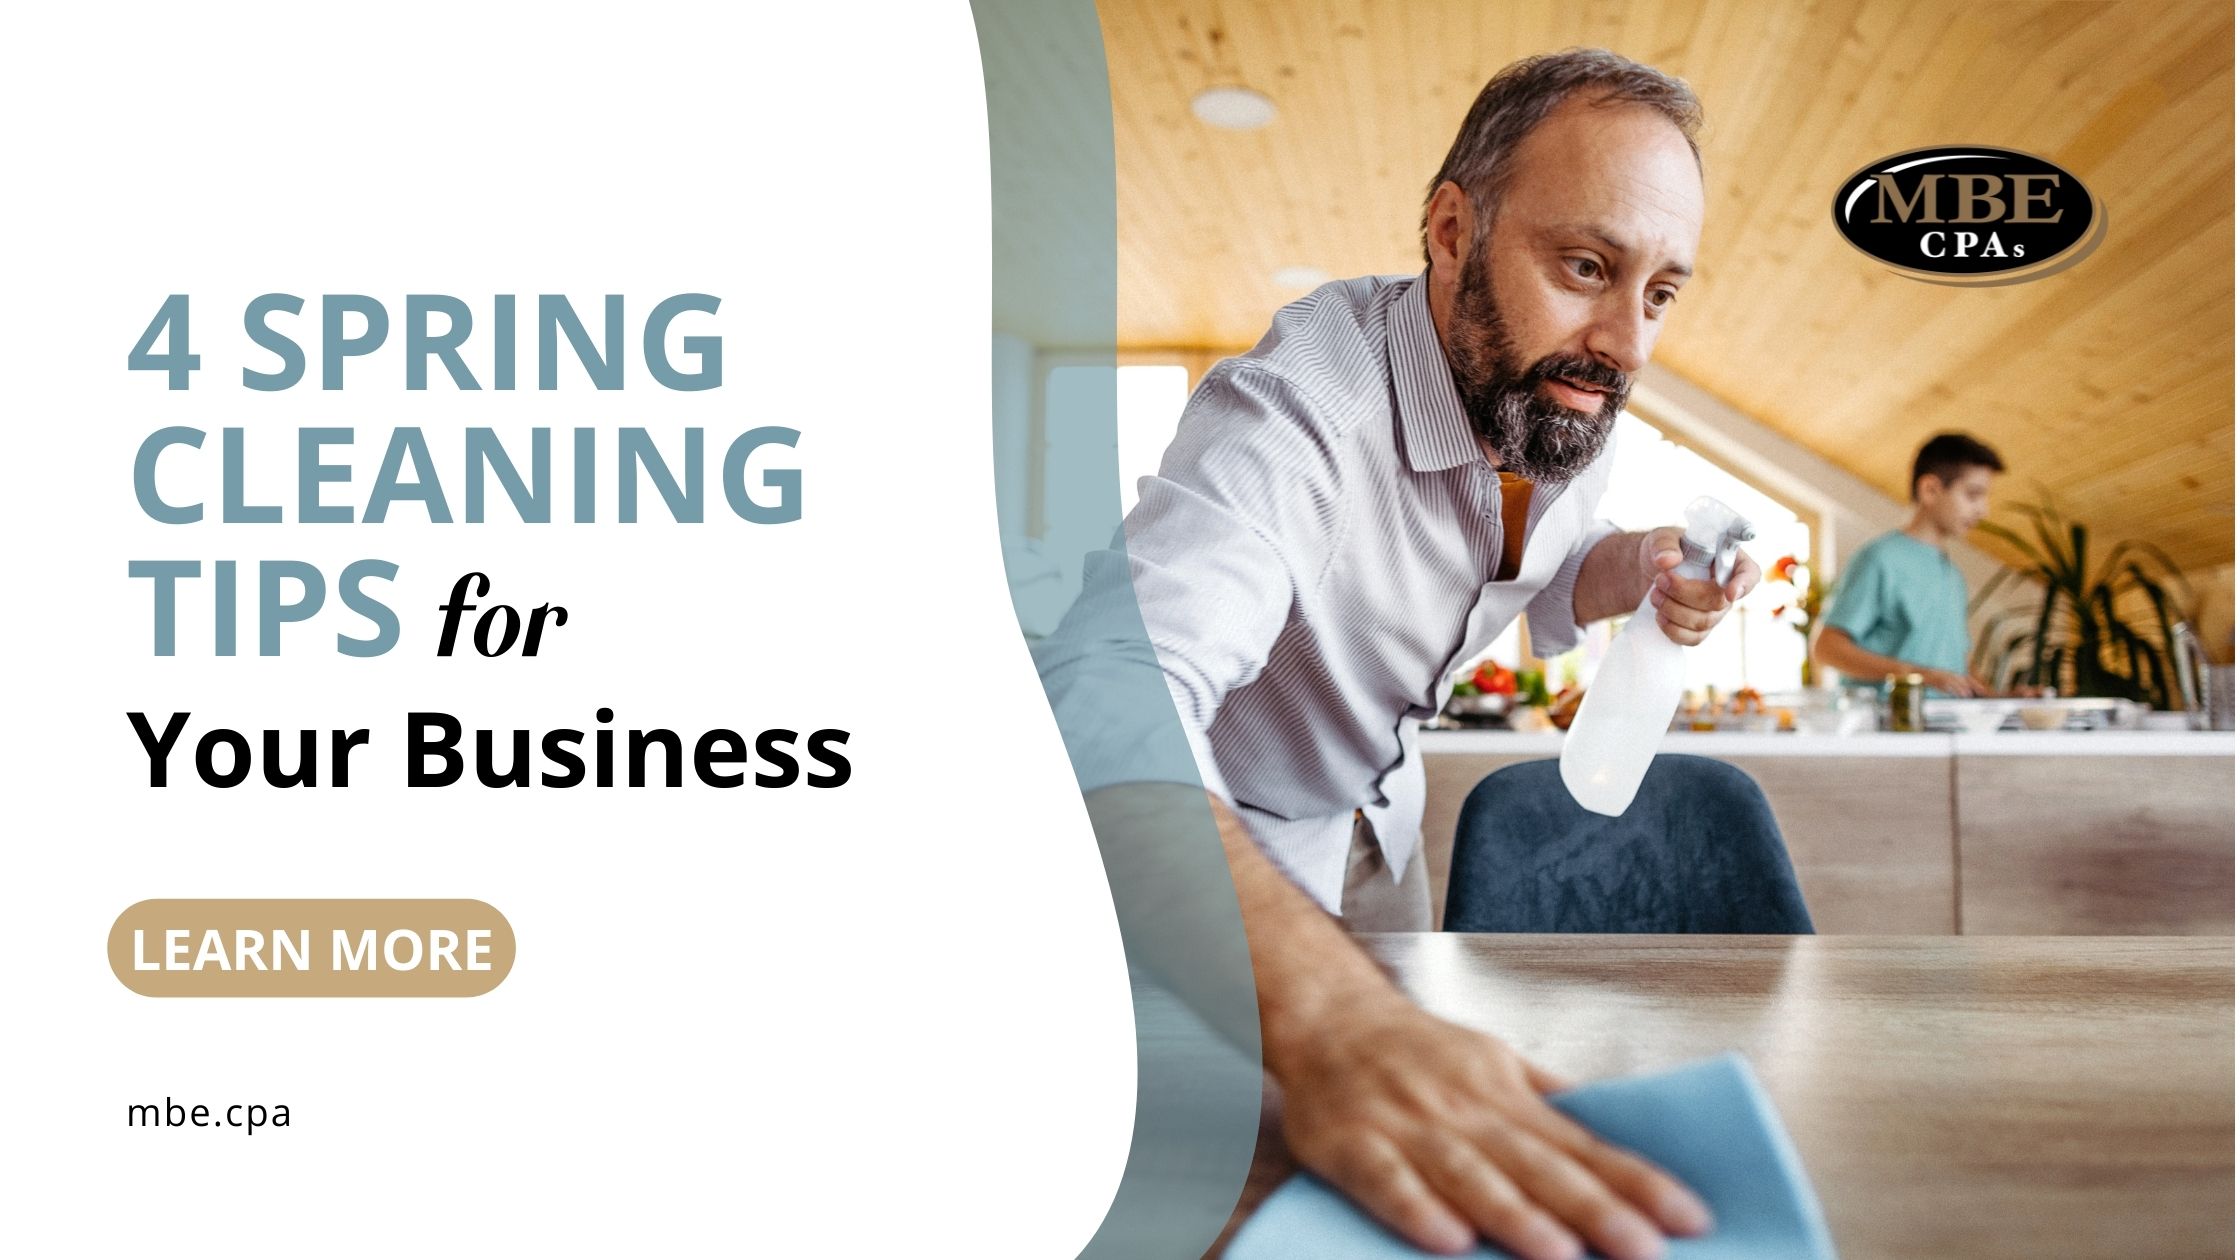 4 Spring Cleaning Tips for Your Business